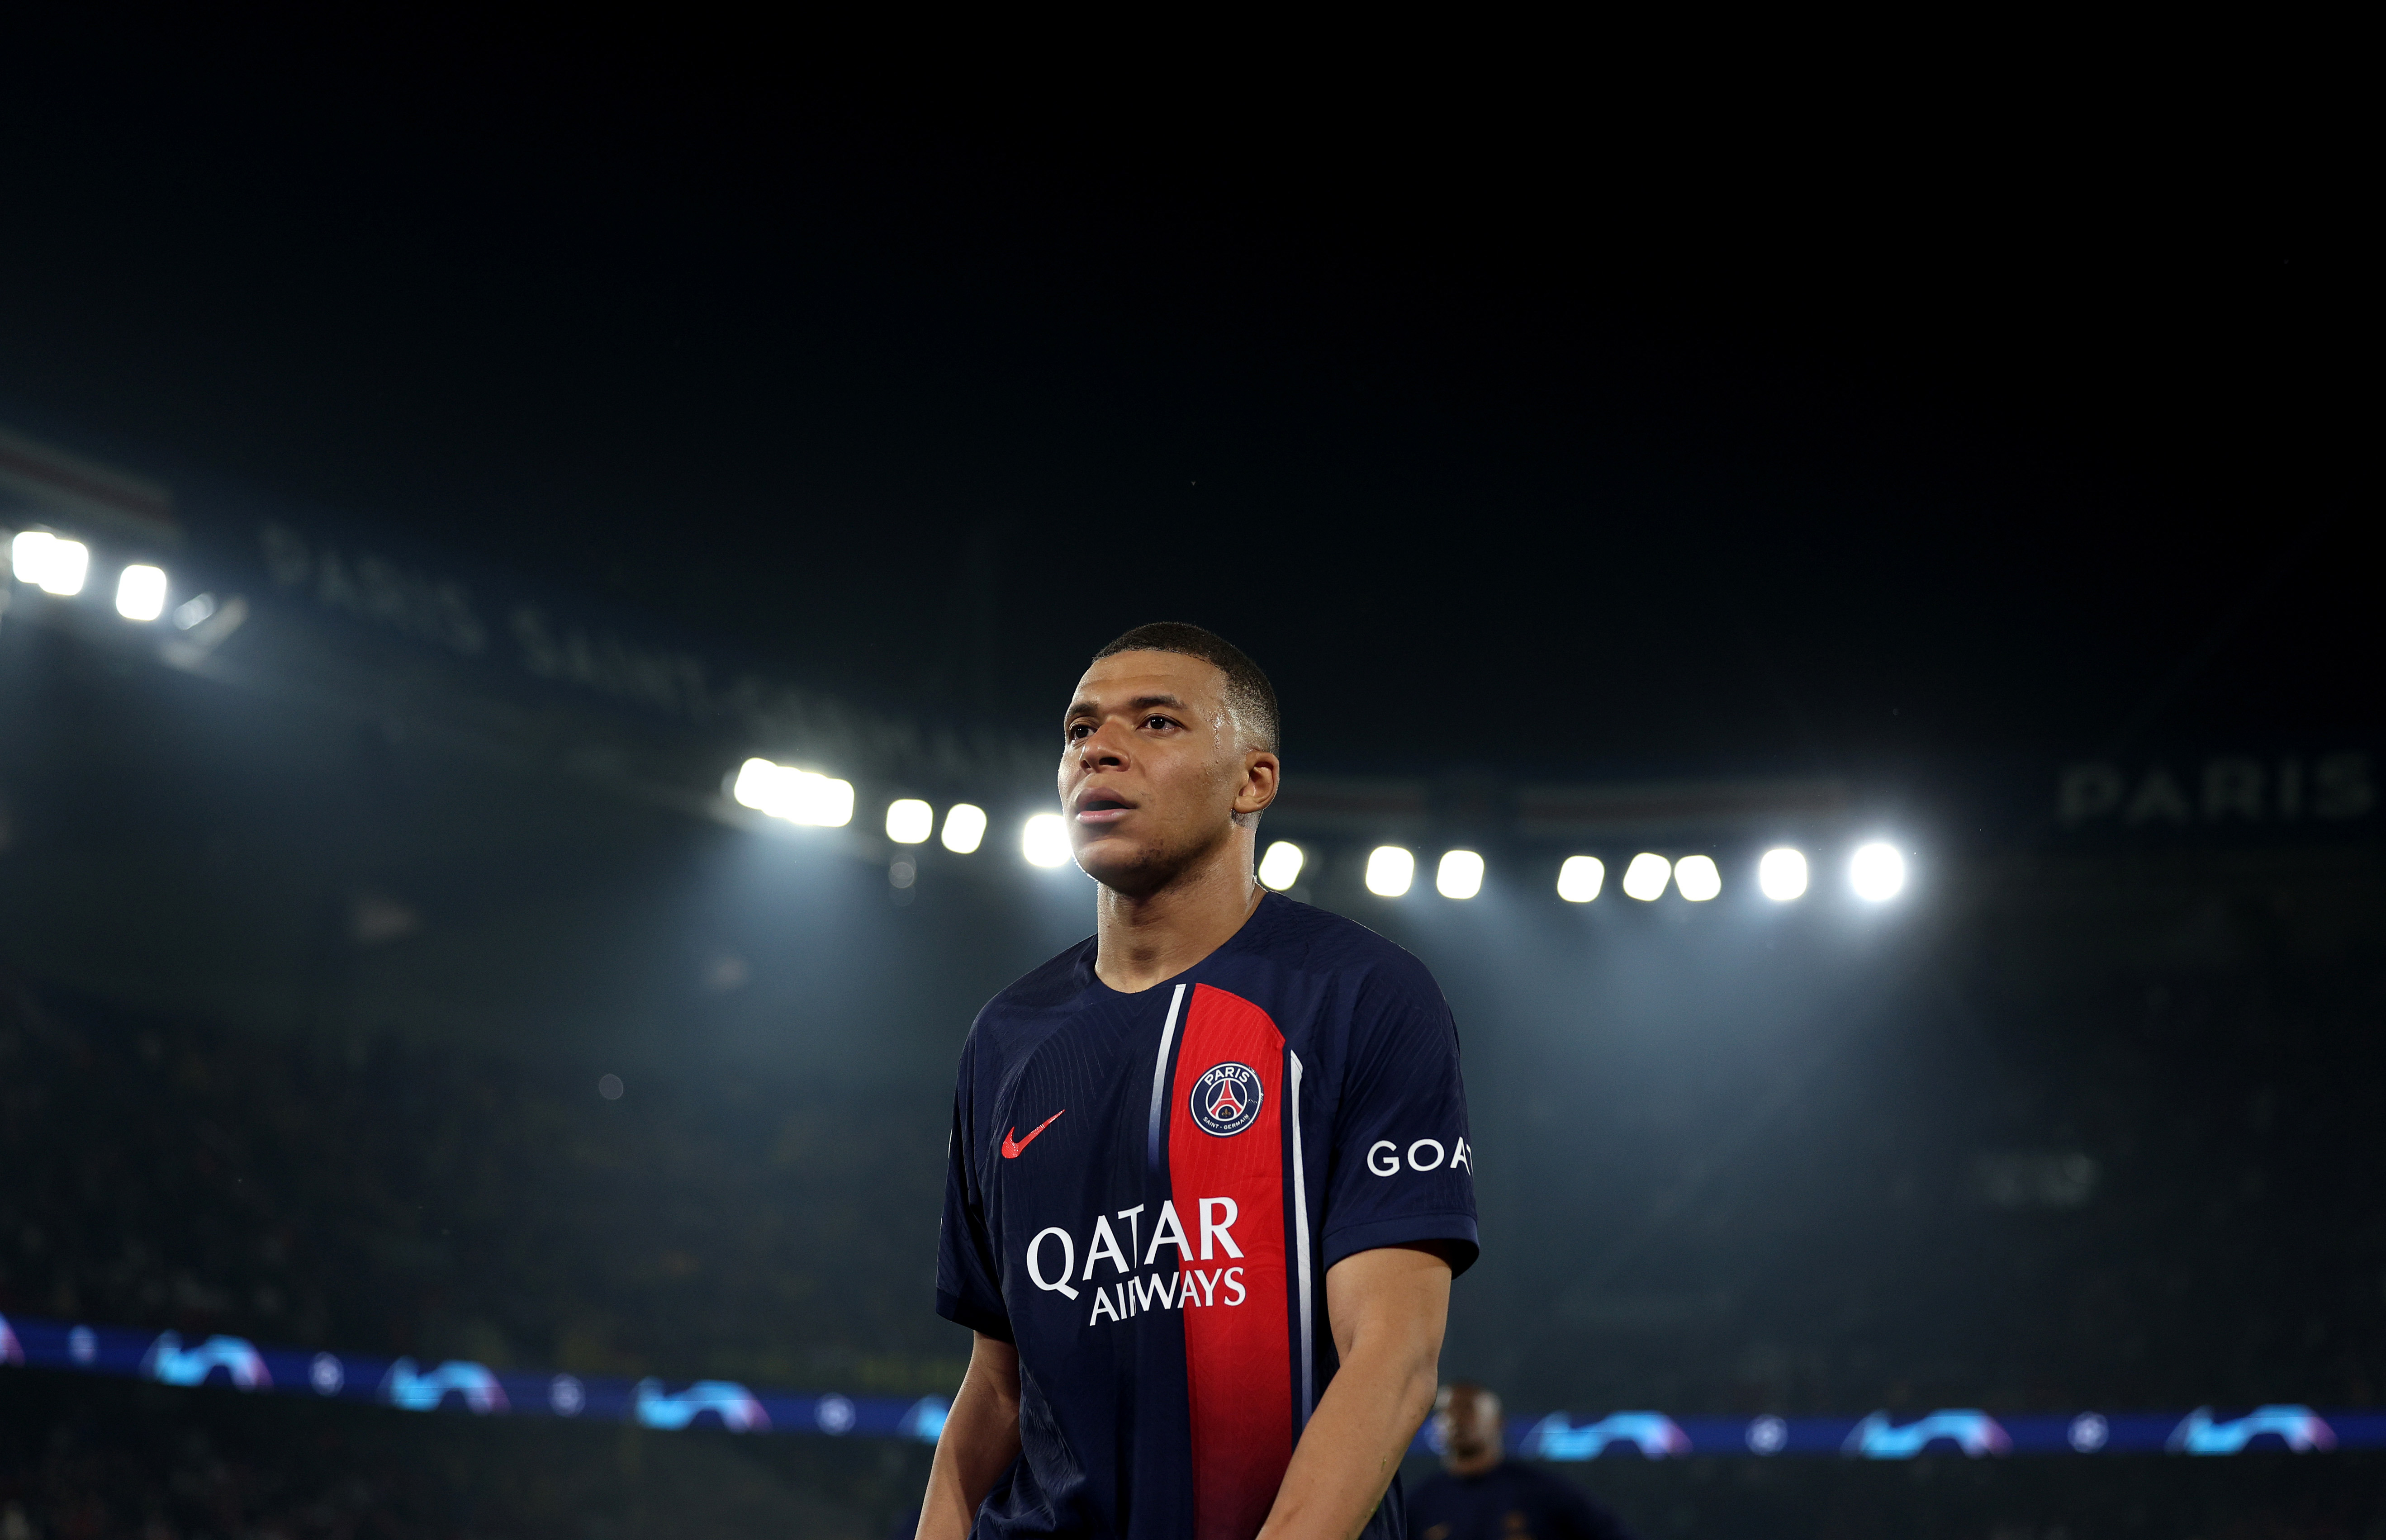 Kylian Mbappe of Paris Saint-Germain looks dejected as he leaves the field after defeat to Borussia Dortmund during the UEFA Champions League semi-final second leg match.